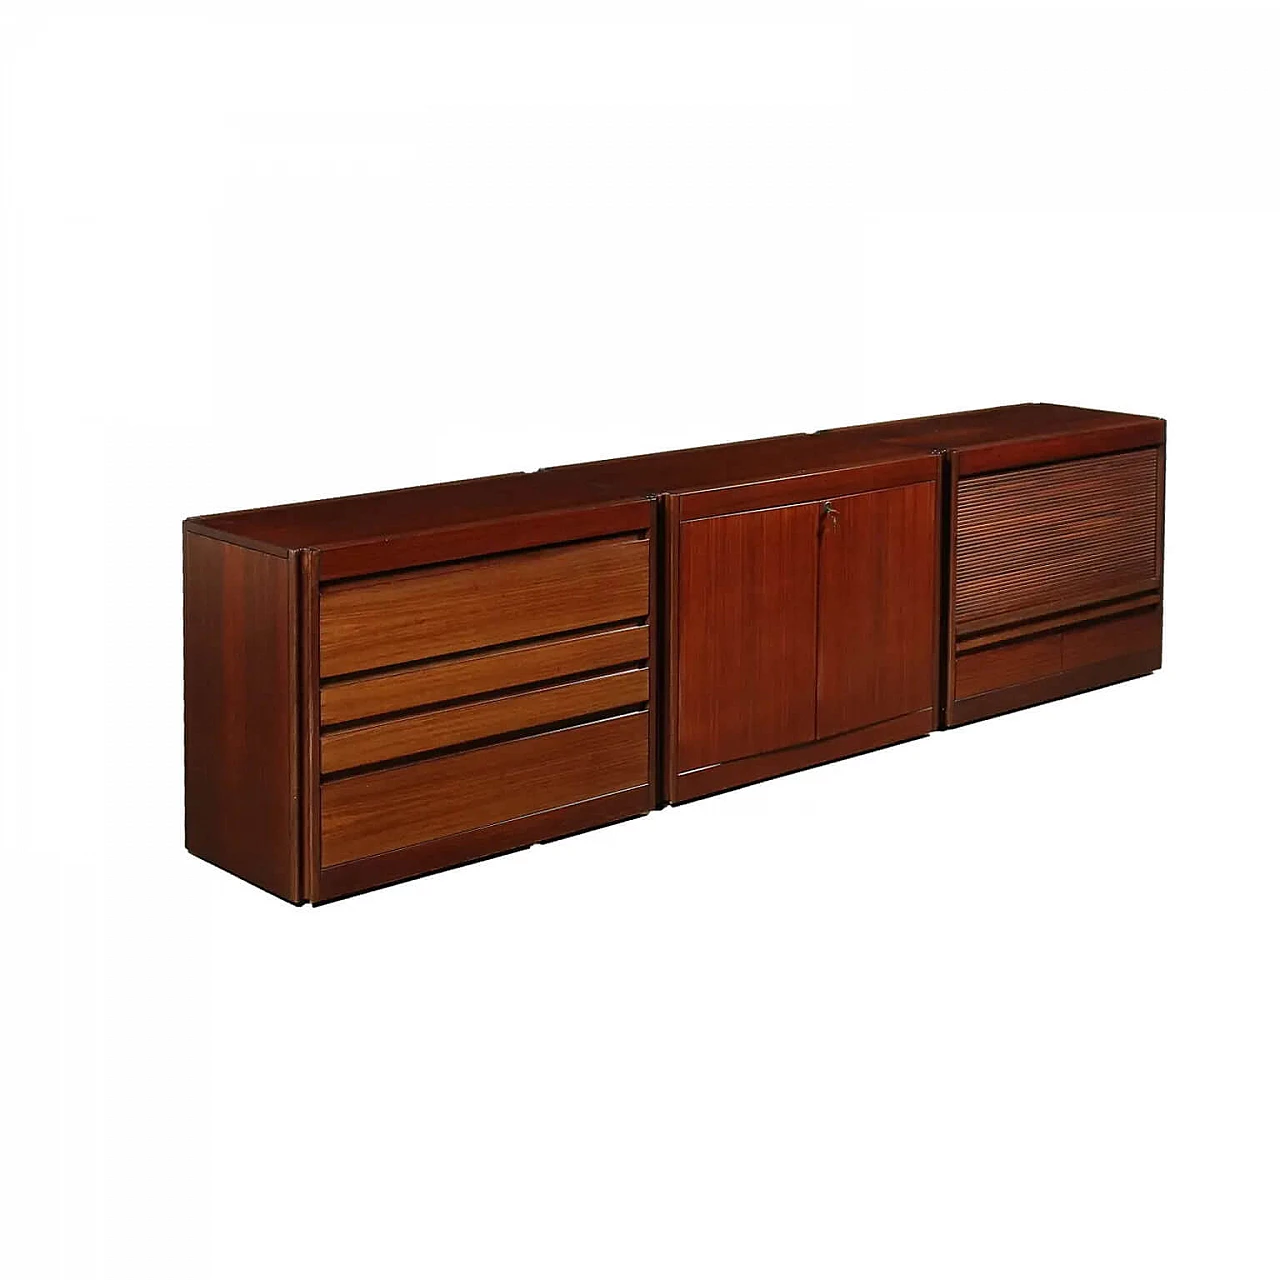 Modular sideboard in rosewood by Angelo Mangiarotti for Molteni&C. 1276459